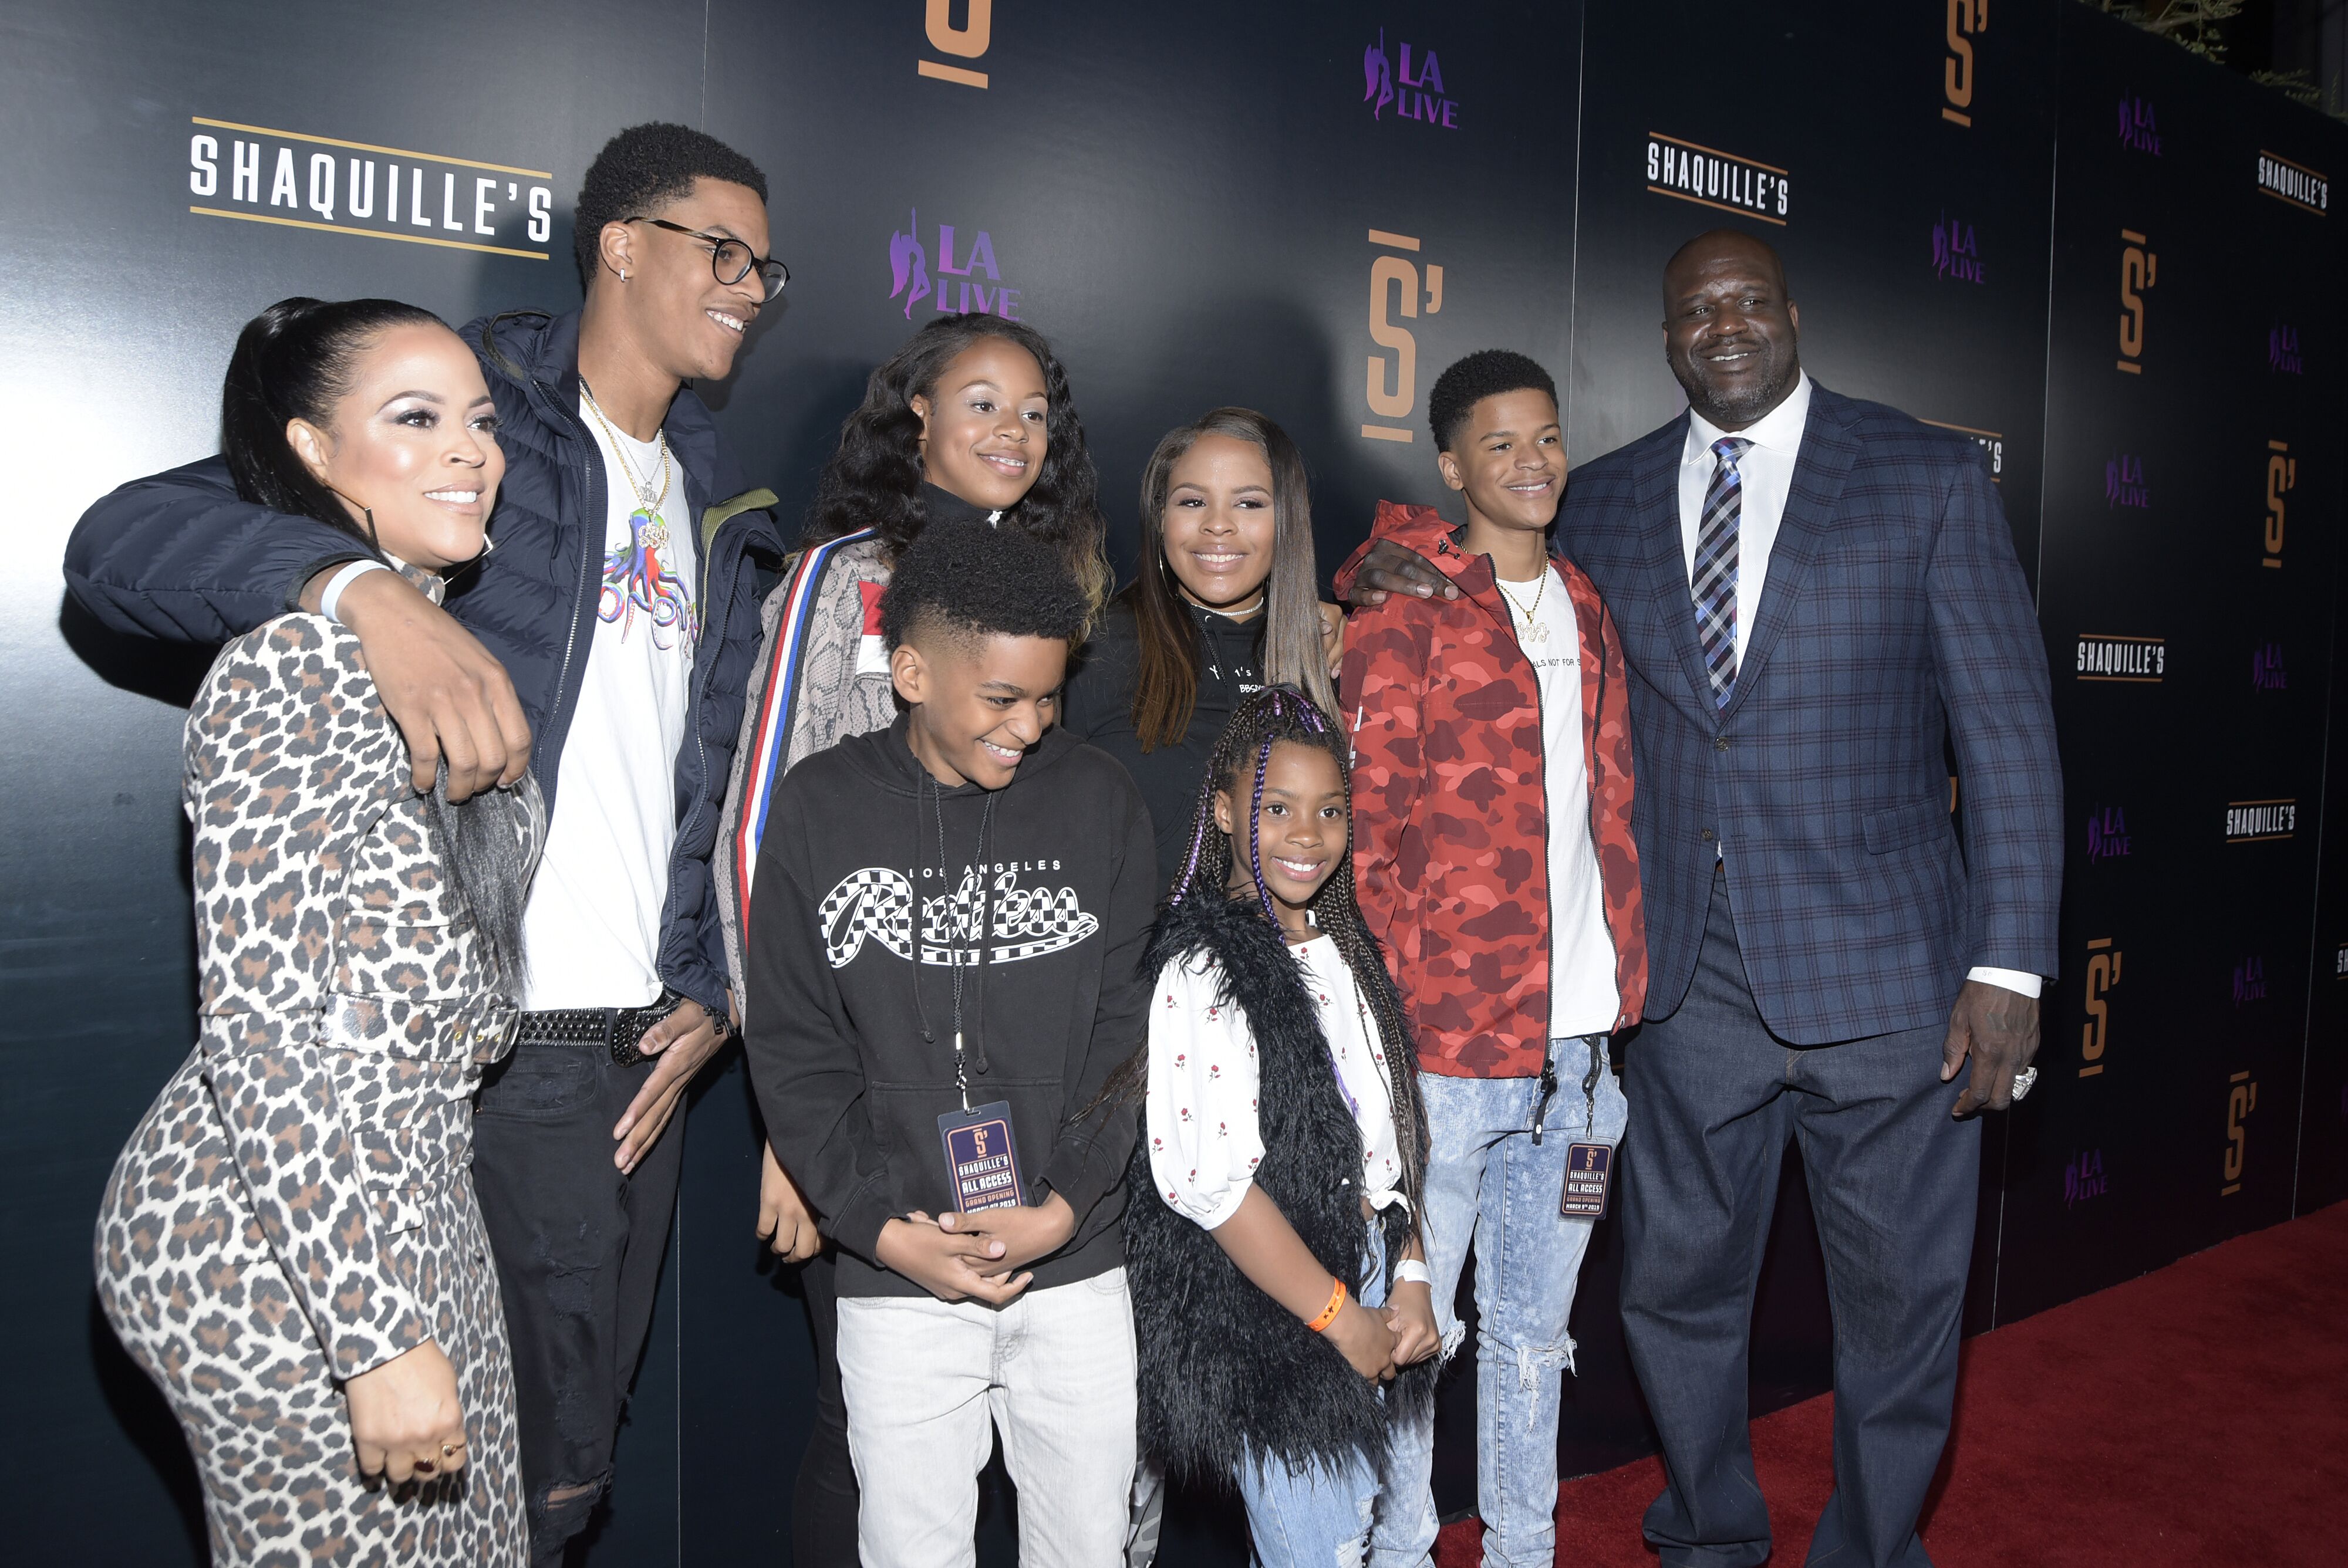 Shaunie O'Neal and family attend the grand opening of Shaquille's At L.A. on March 09, 2019 in Los Angeles, California. | Photo: Getty Images 